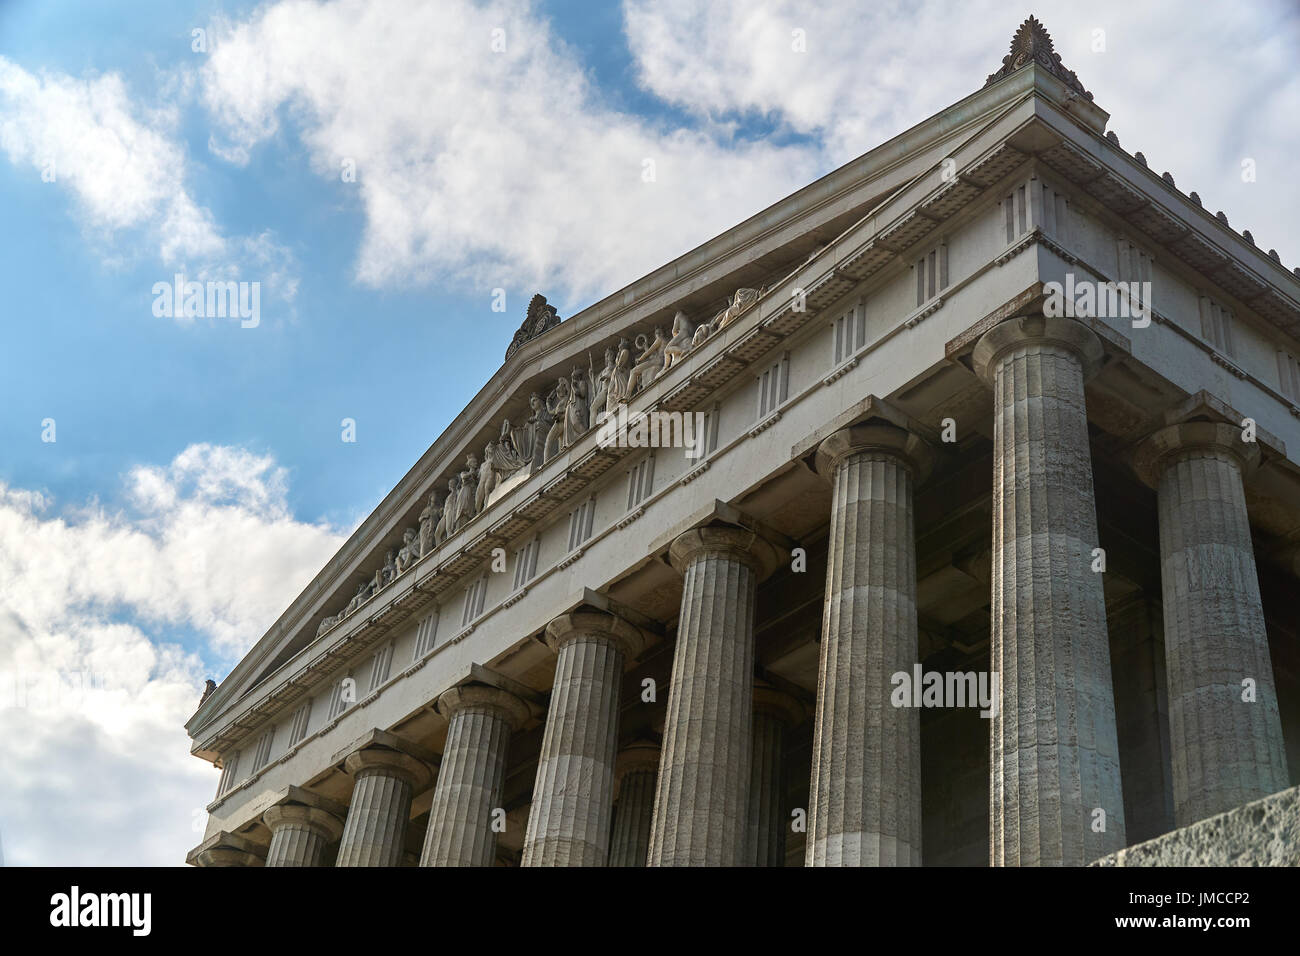 Walhalla and the blue sky with some clouds. famous memorial near regensburg in bavaria, germany. Stock Photo